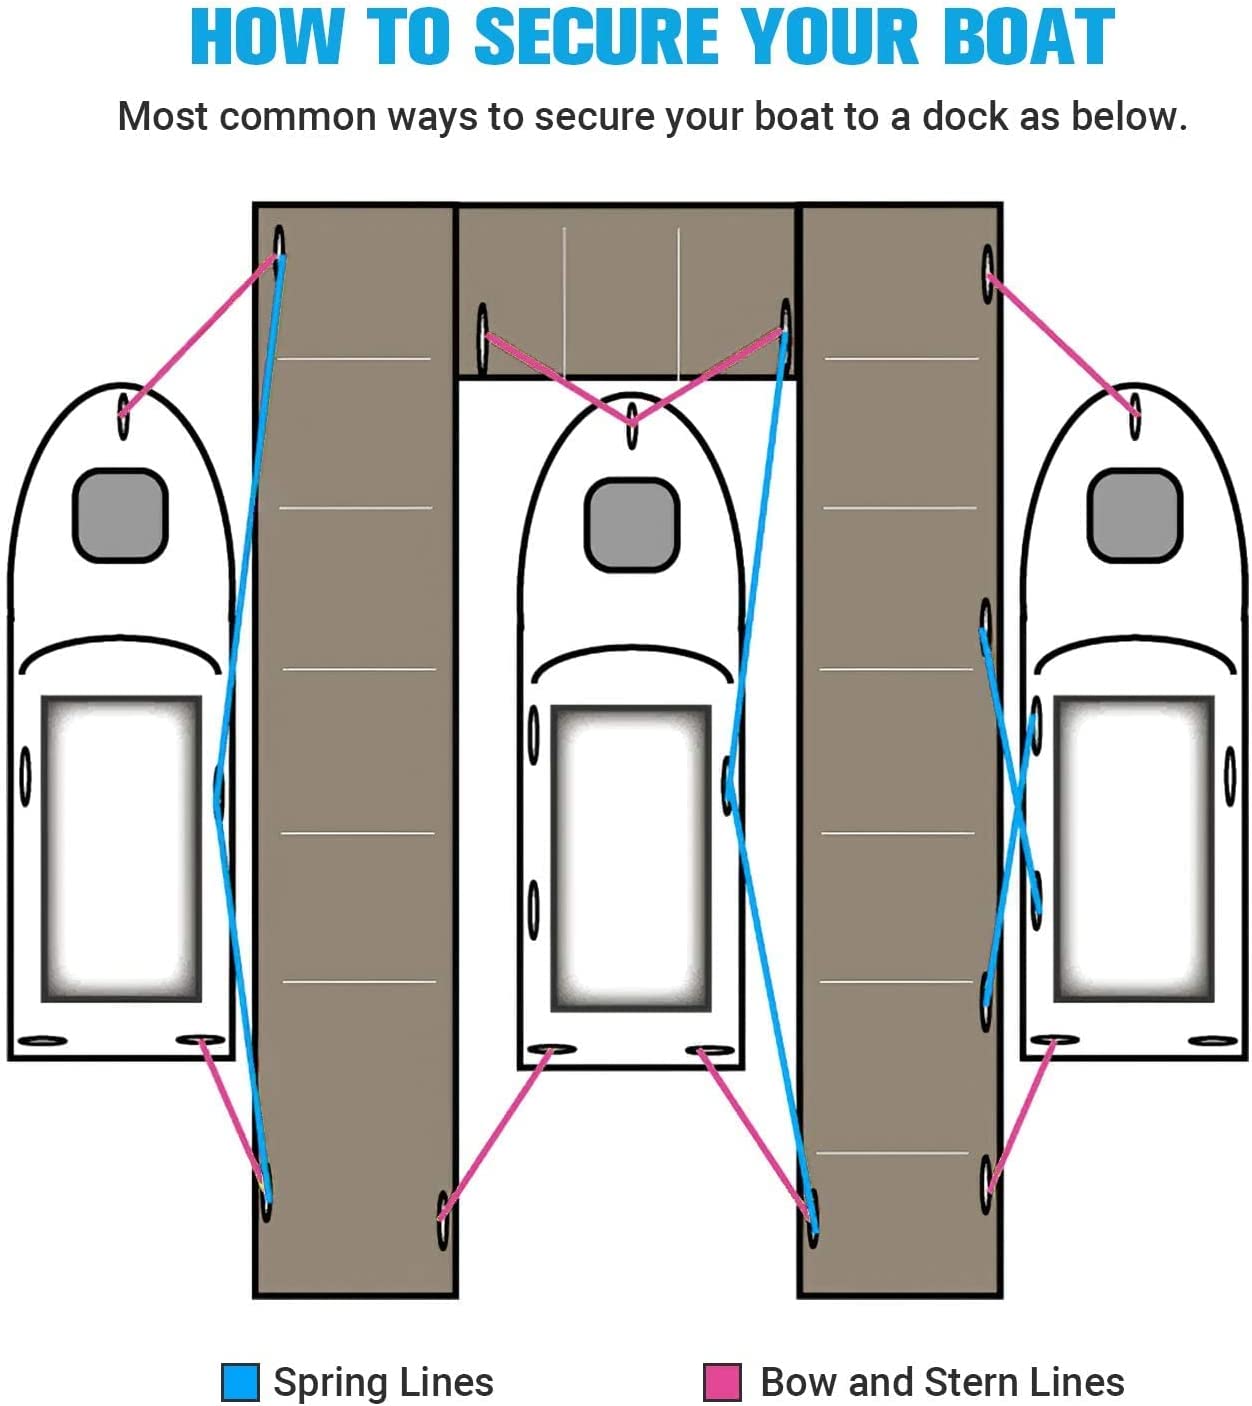 Most common ways to secure your boat to a dock